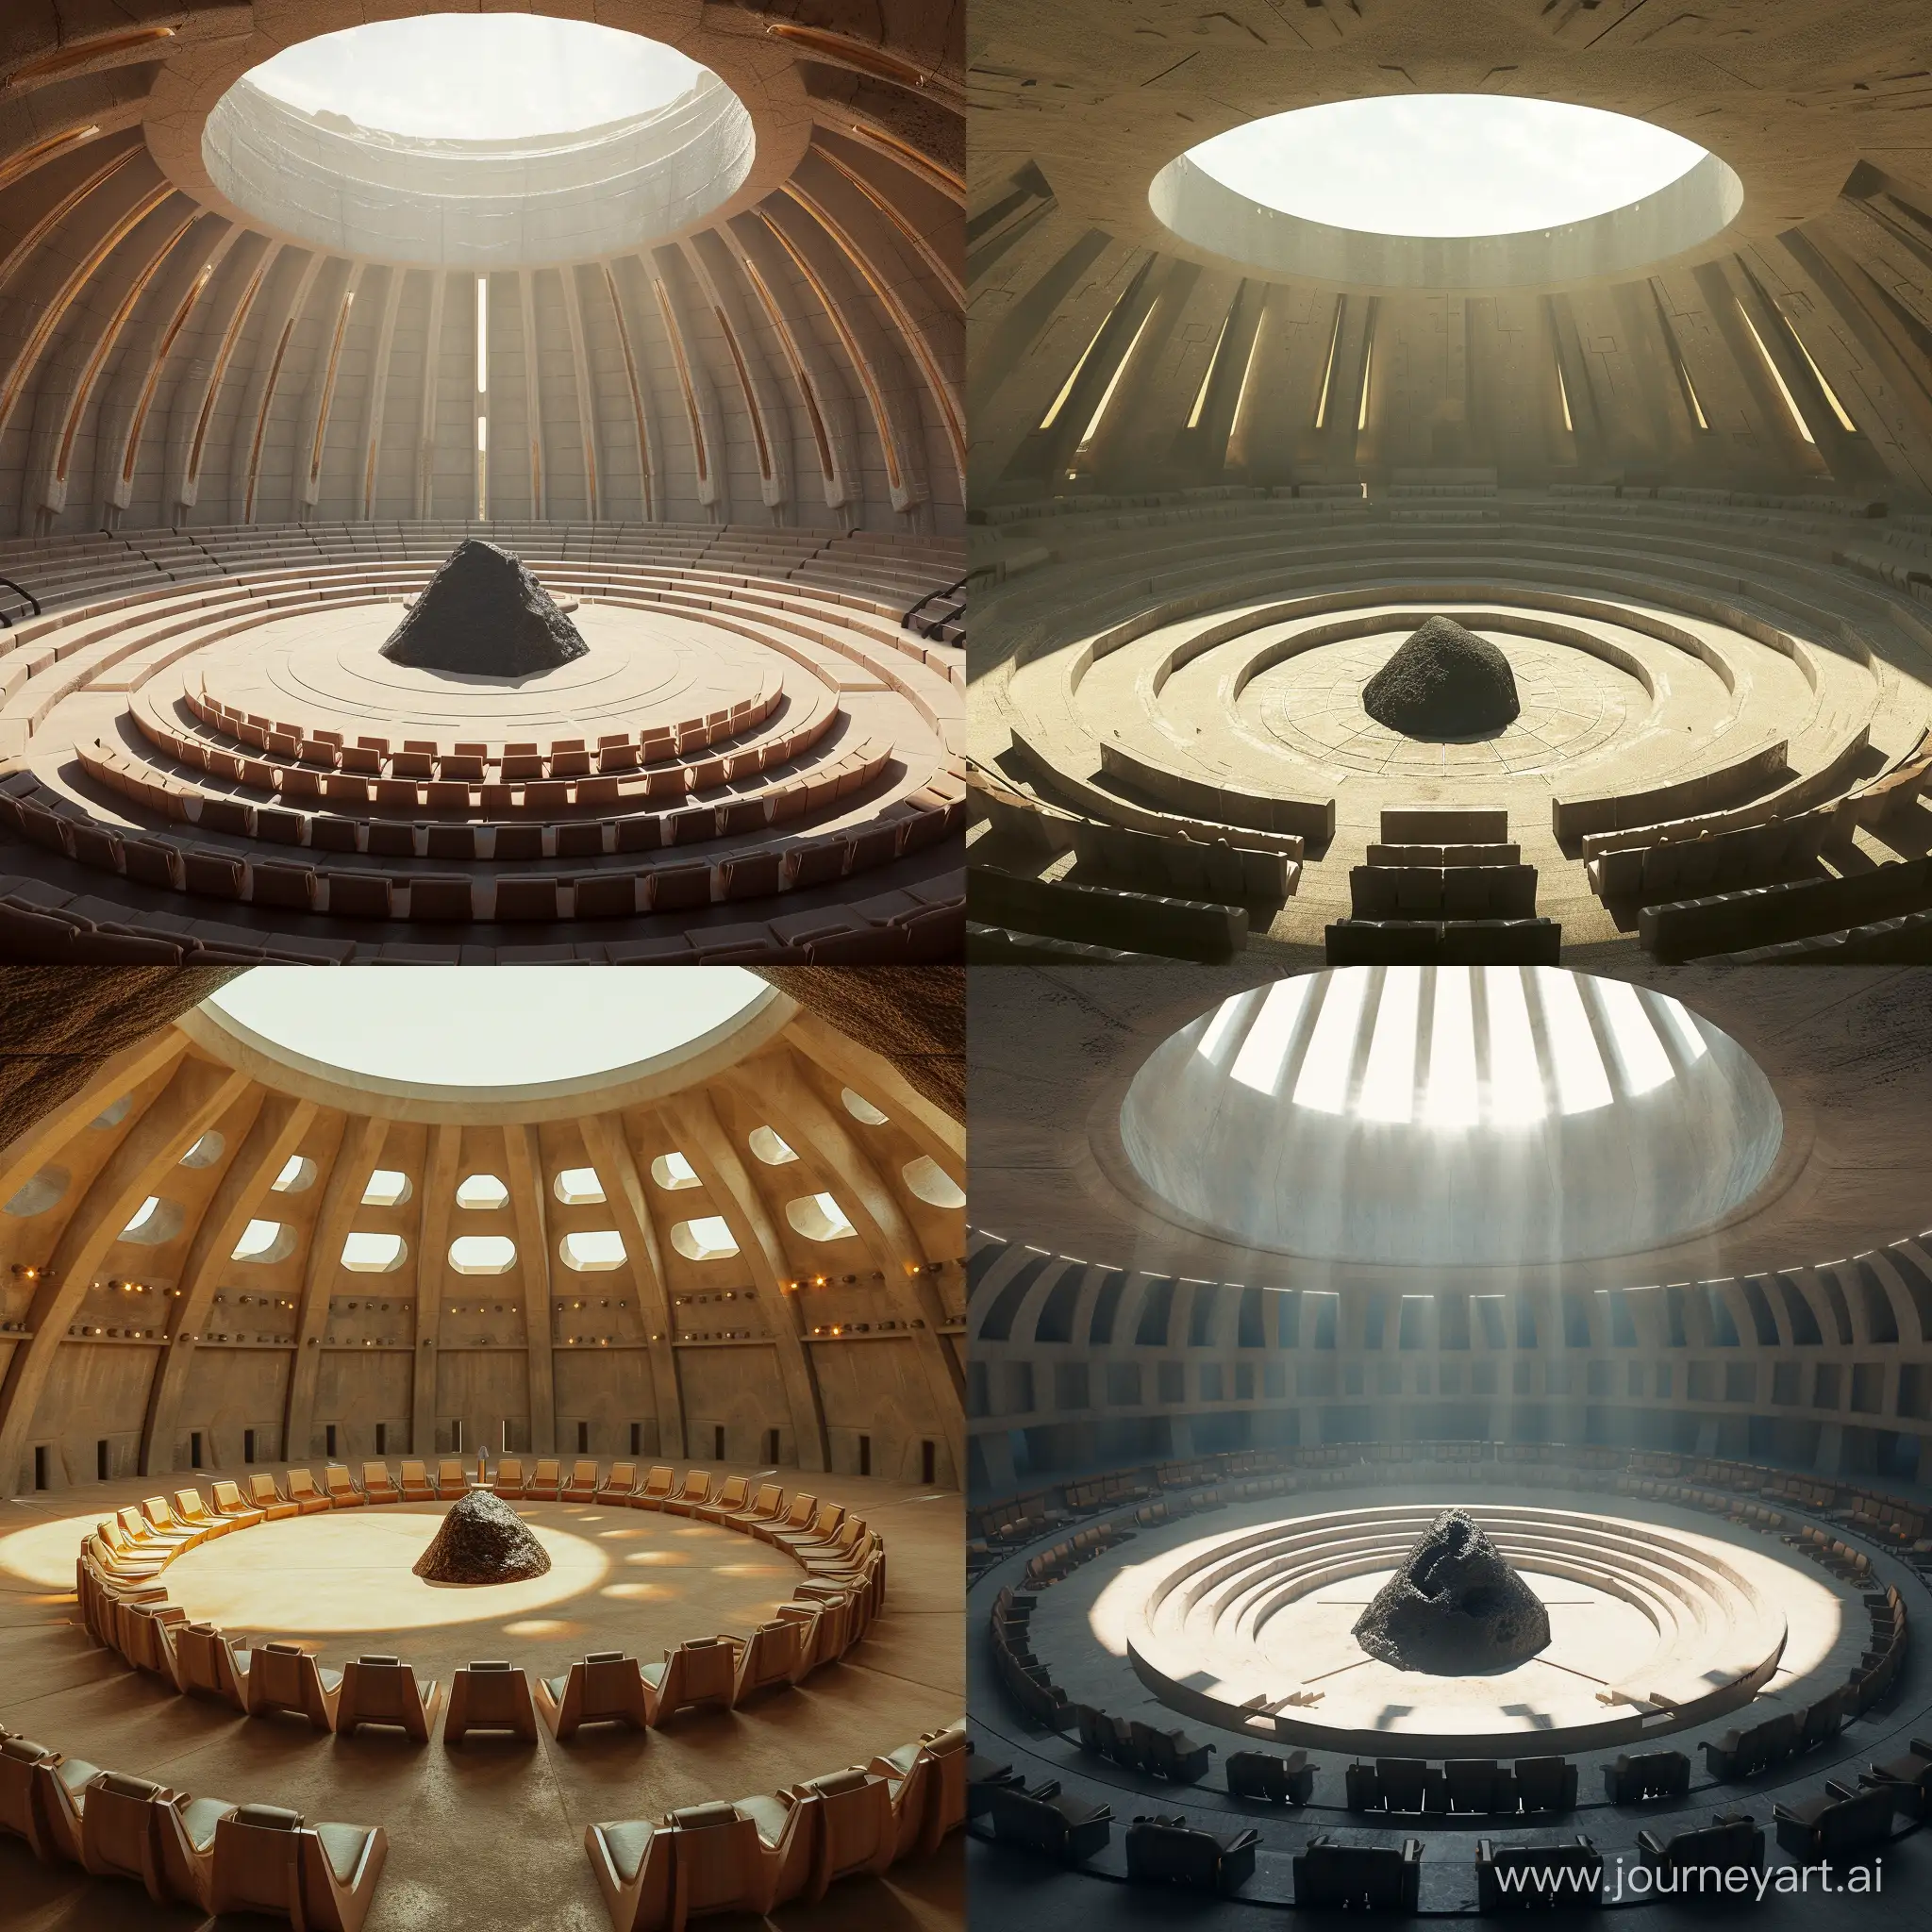 Circular-Moon-Temple-with-Central-Altar-and-Sunlit-Dome